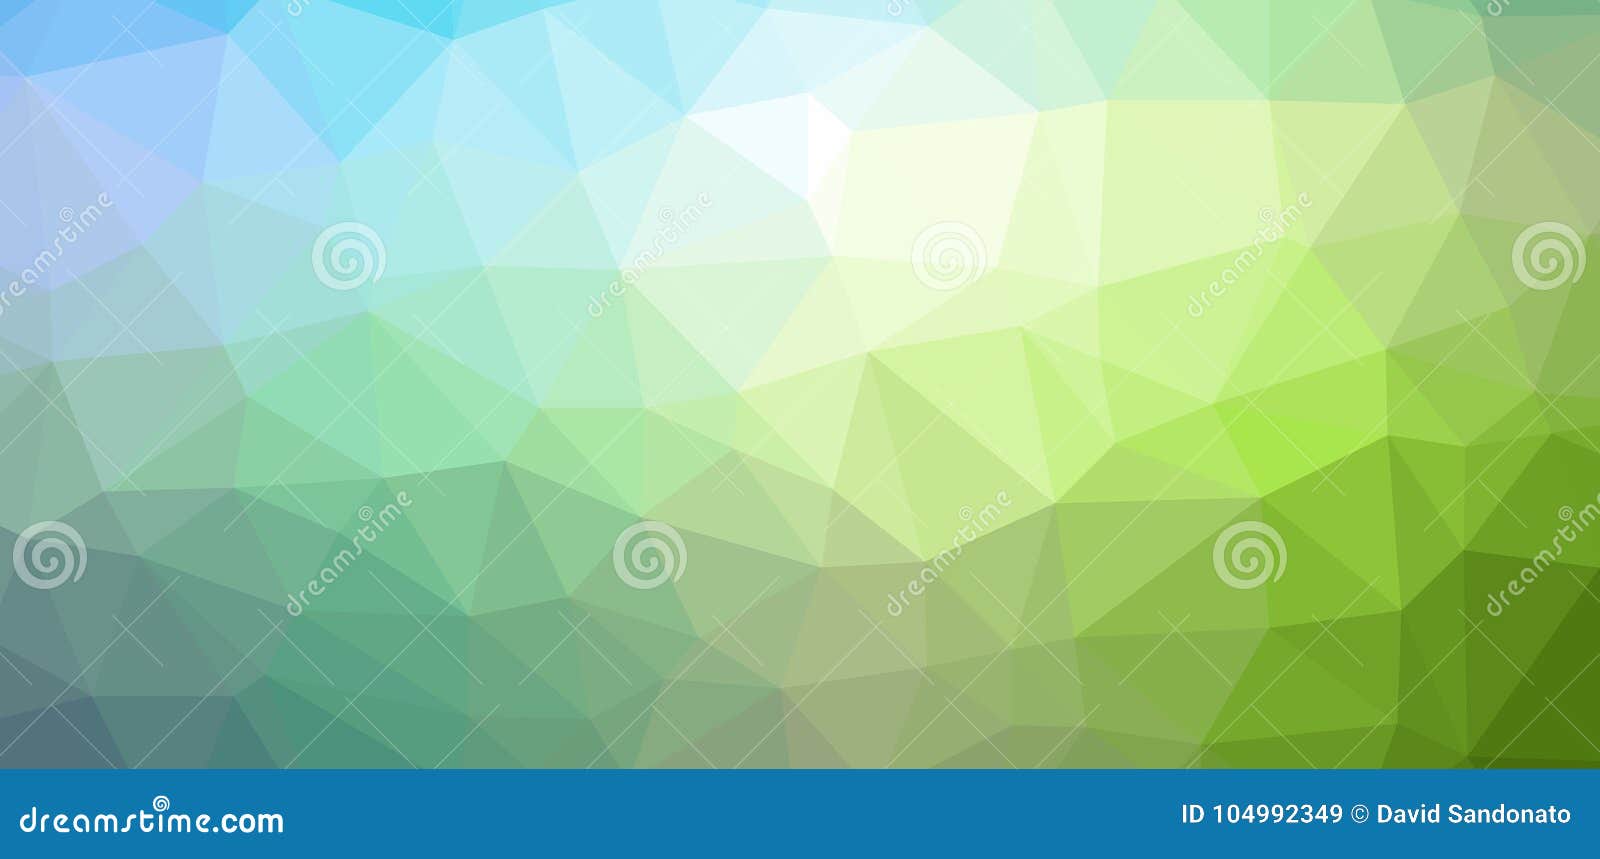 low poly abstract background with colorful triangular polygons